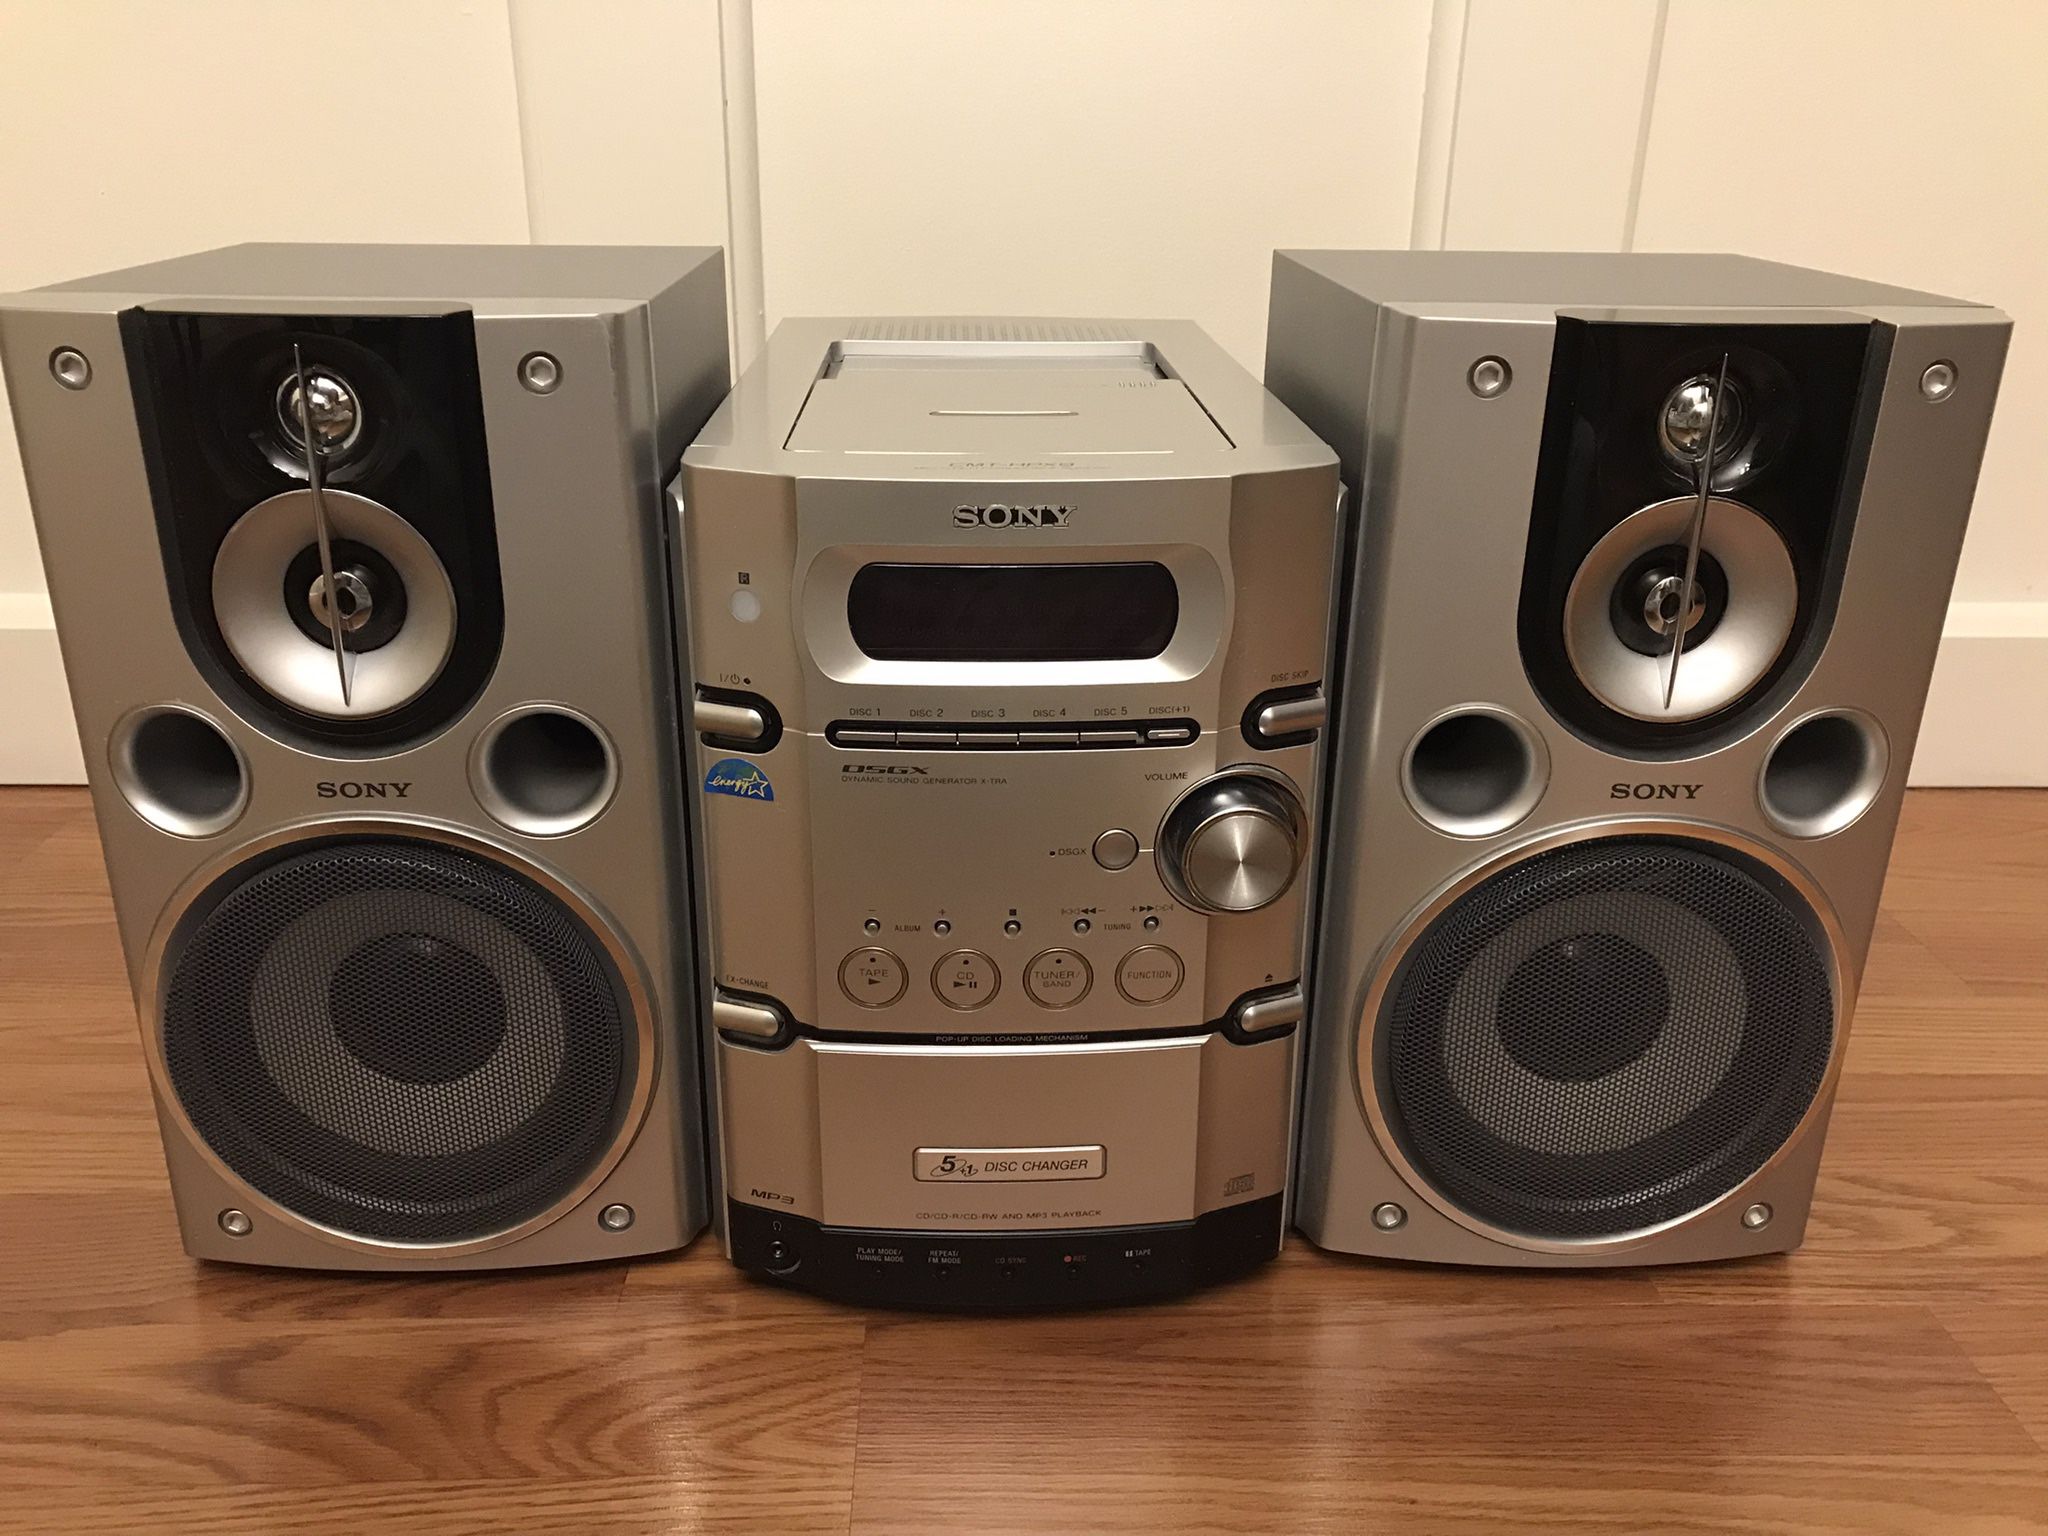 Sony CMT-HPX9 Micro Hi-Fi Component System (*5-Disc CD Changer Gets Stuck) 